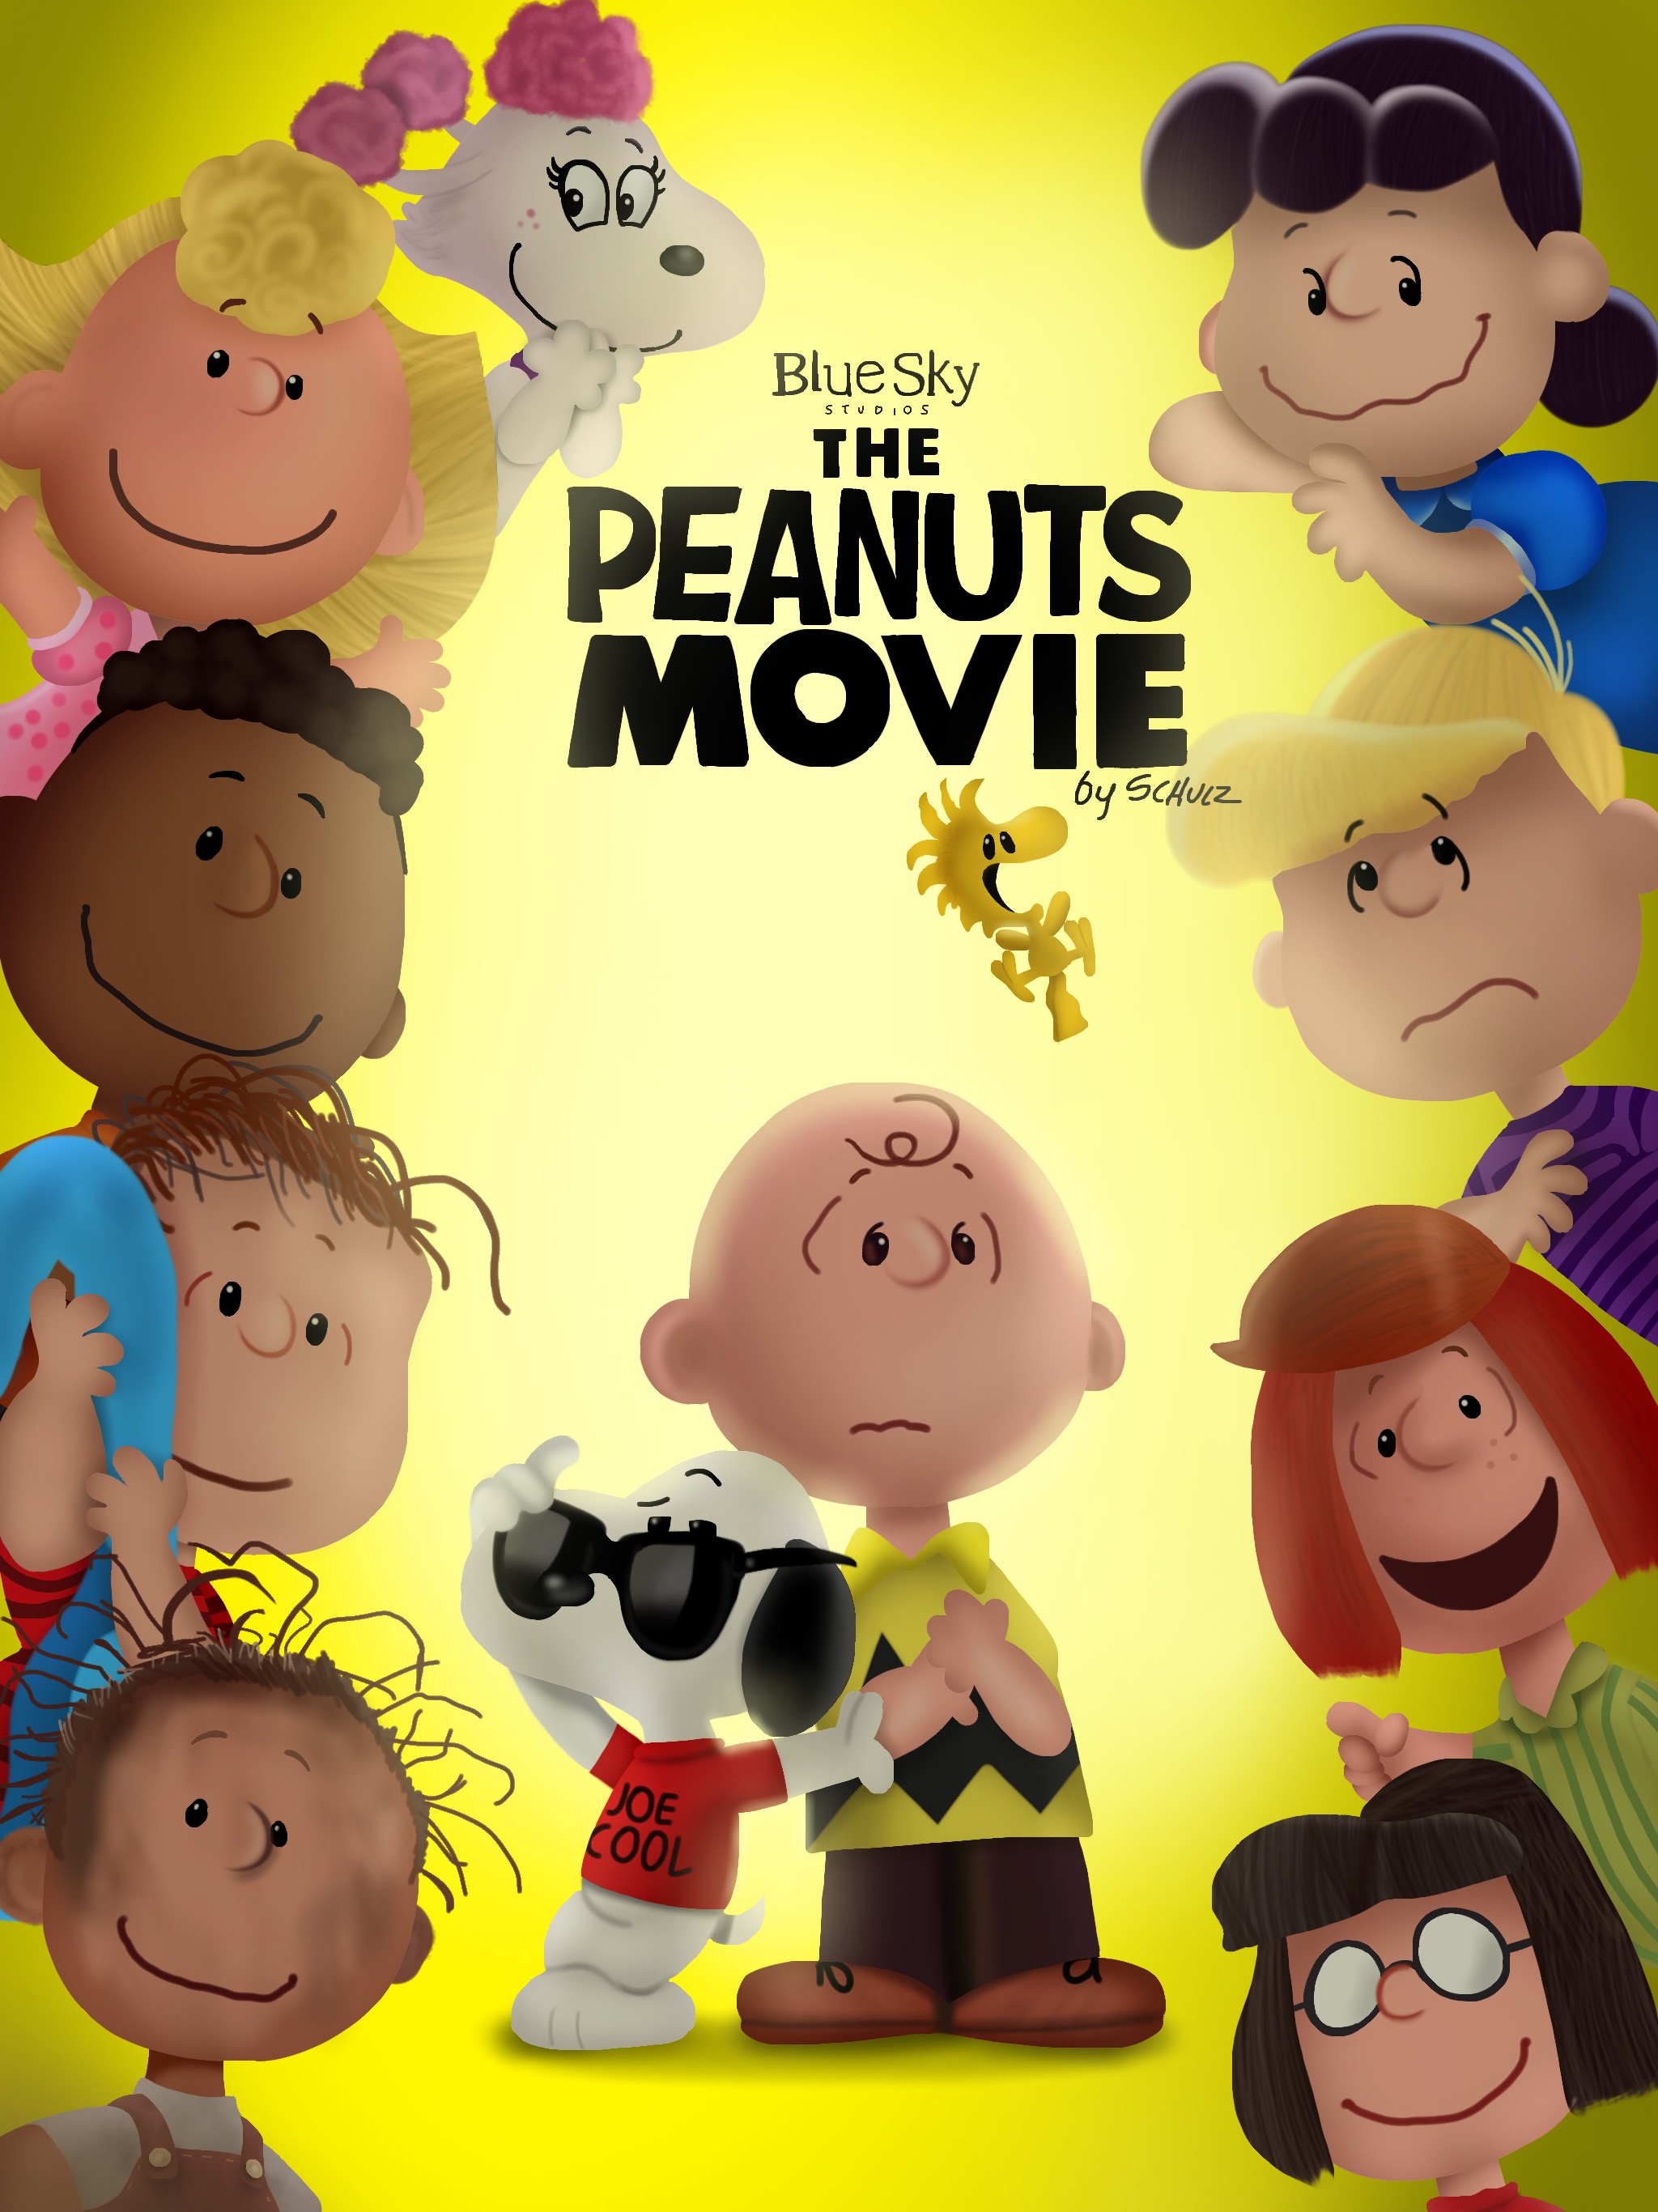 The Peanuts Movie (Fan Made Poster) by JustSomePainter11 on DeviantArt